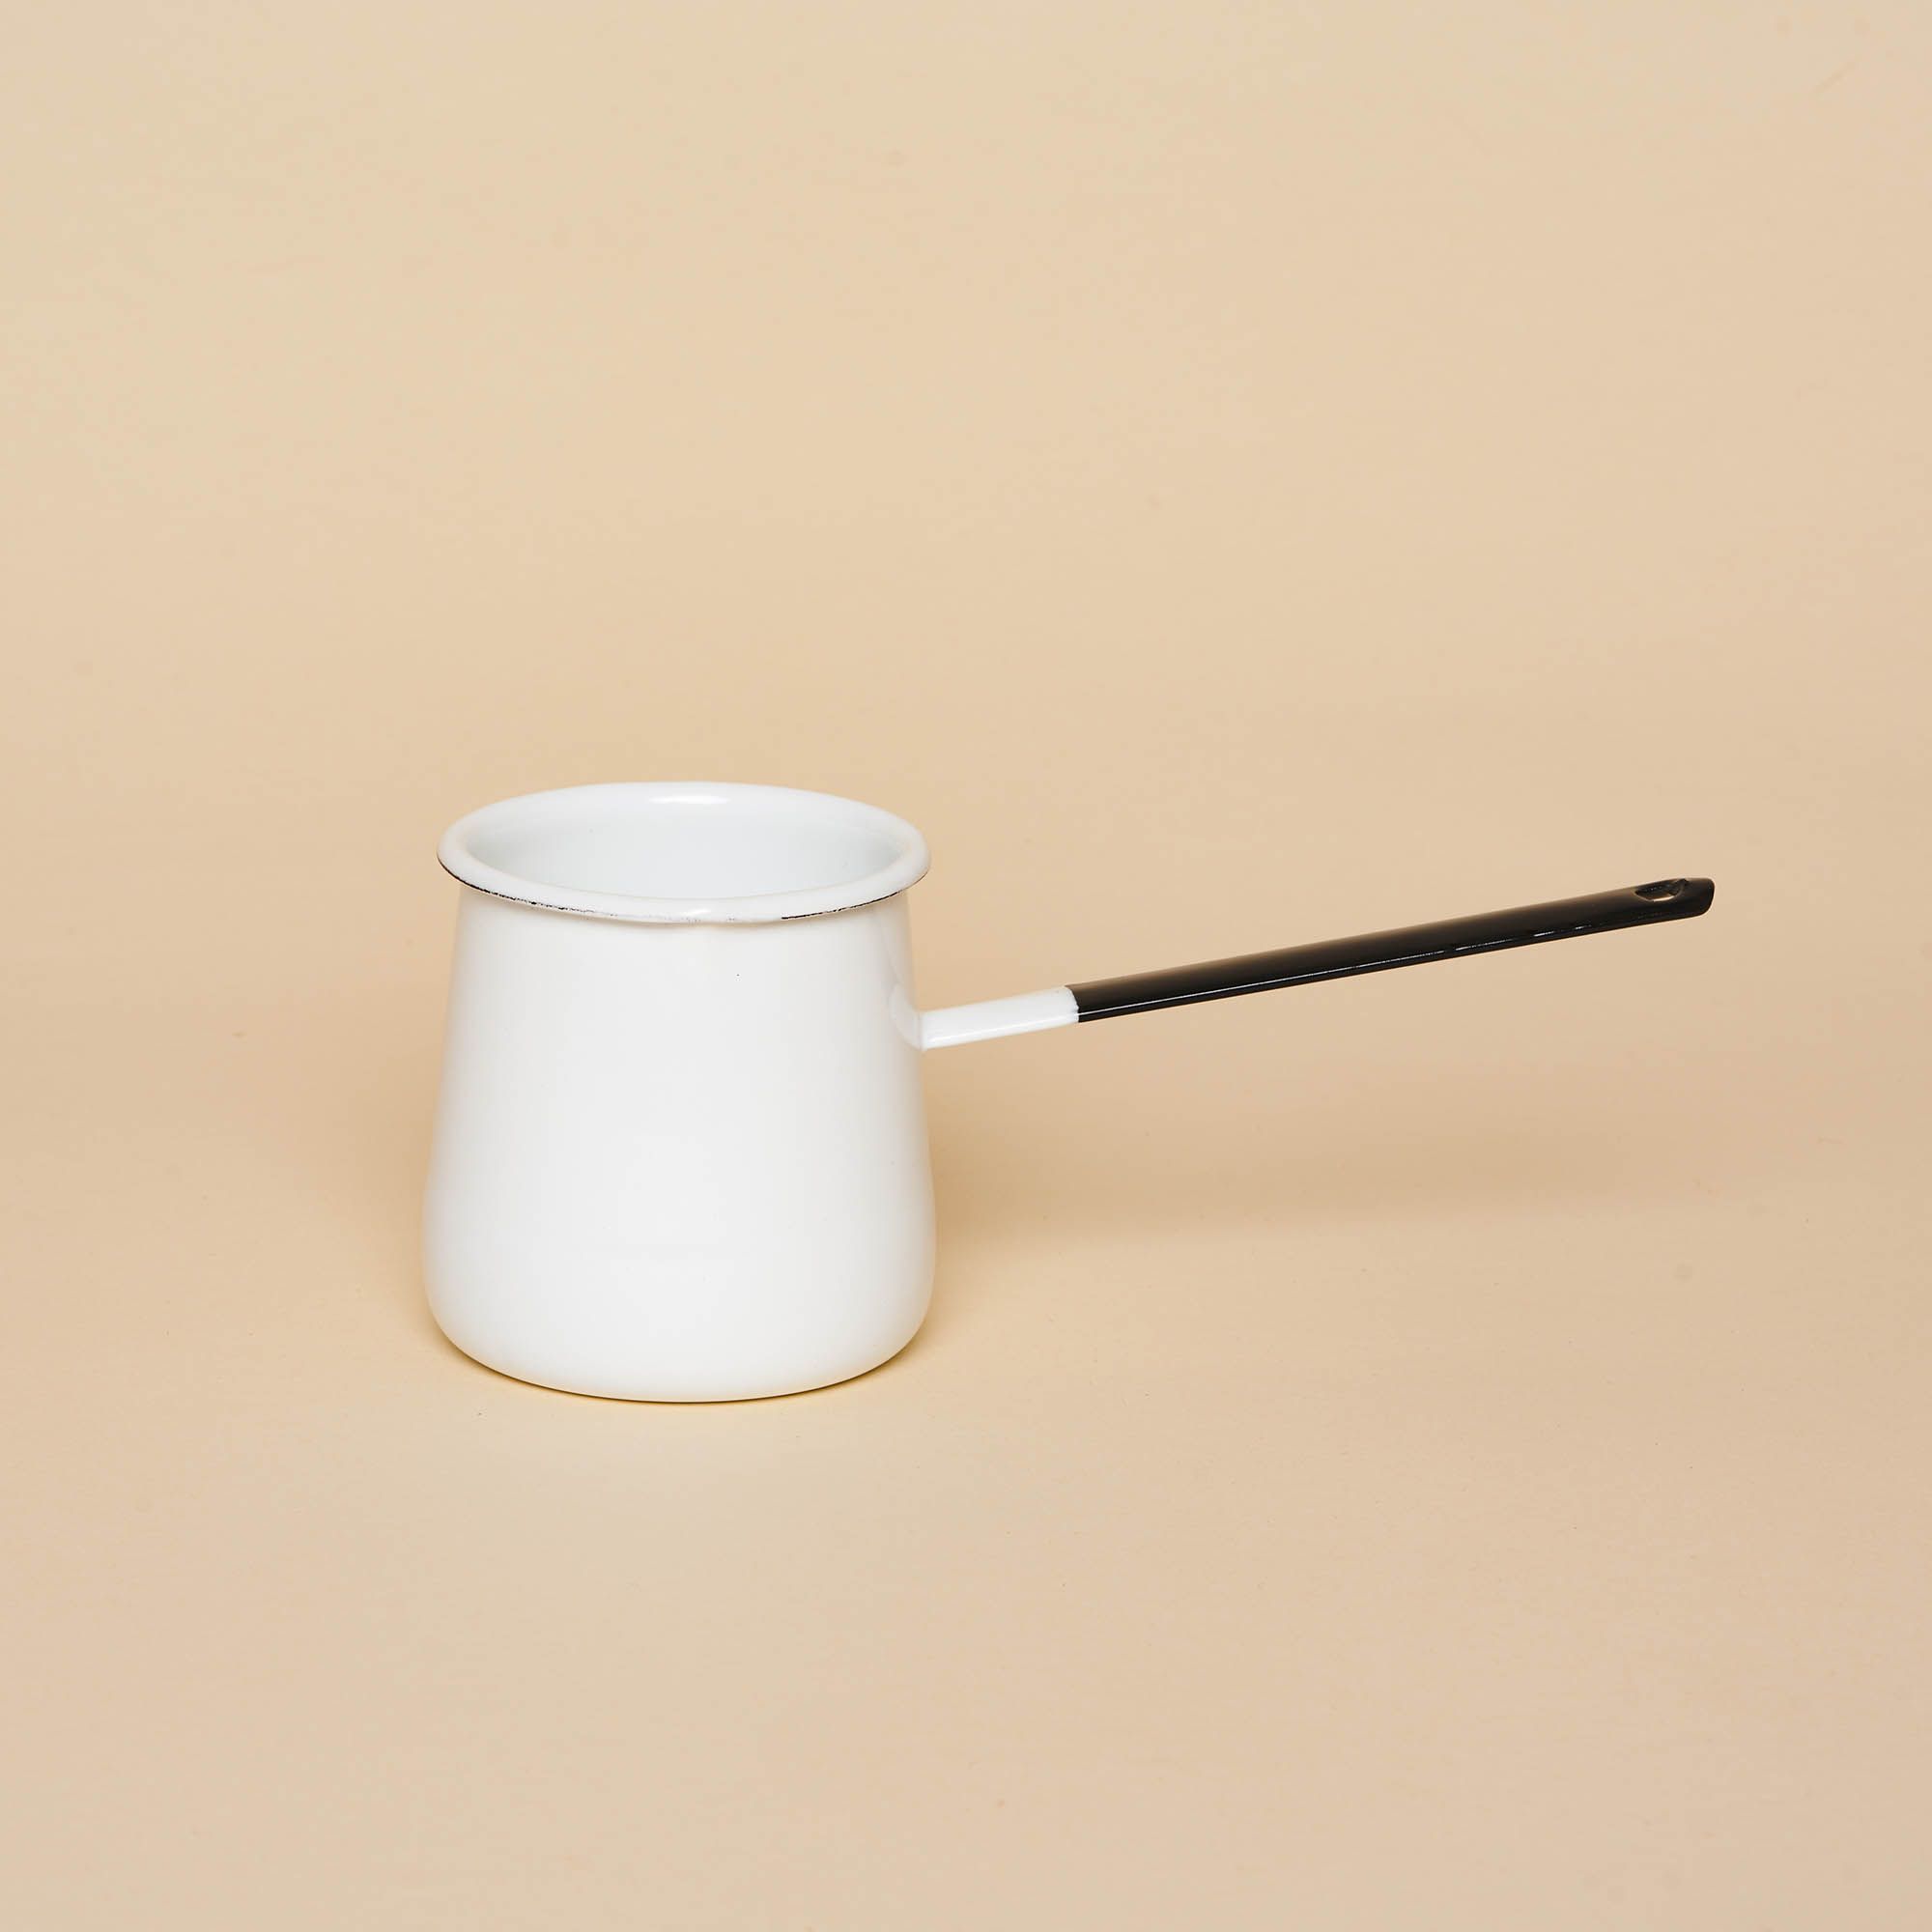 A small enamel pot that could fit in the palm of your hand